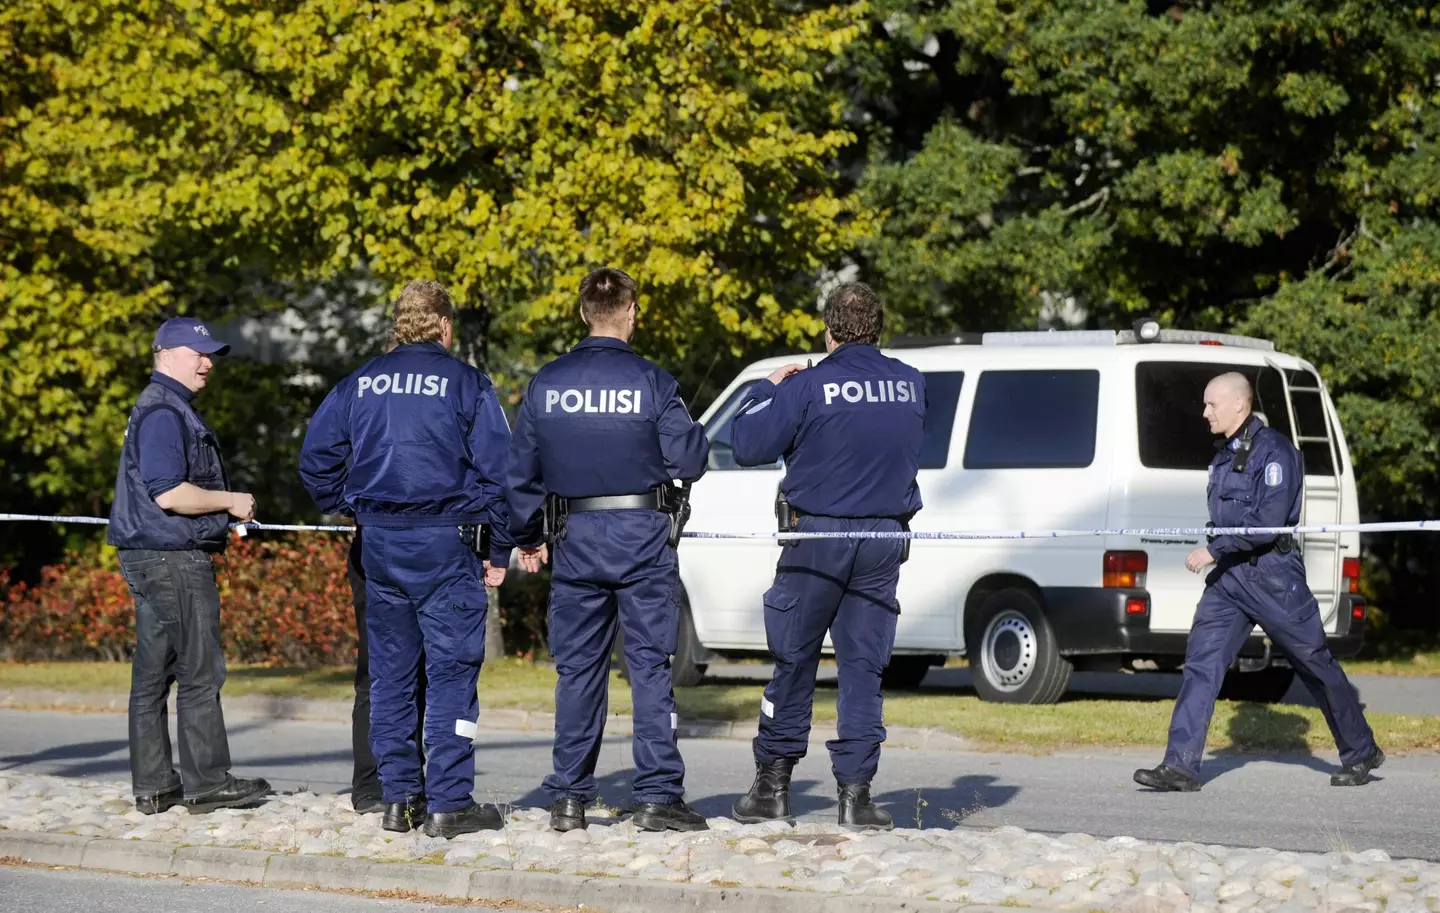 Finnish police were investigating a car theft.